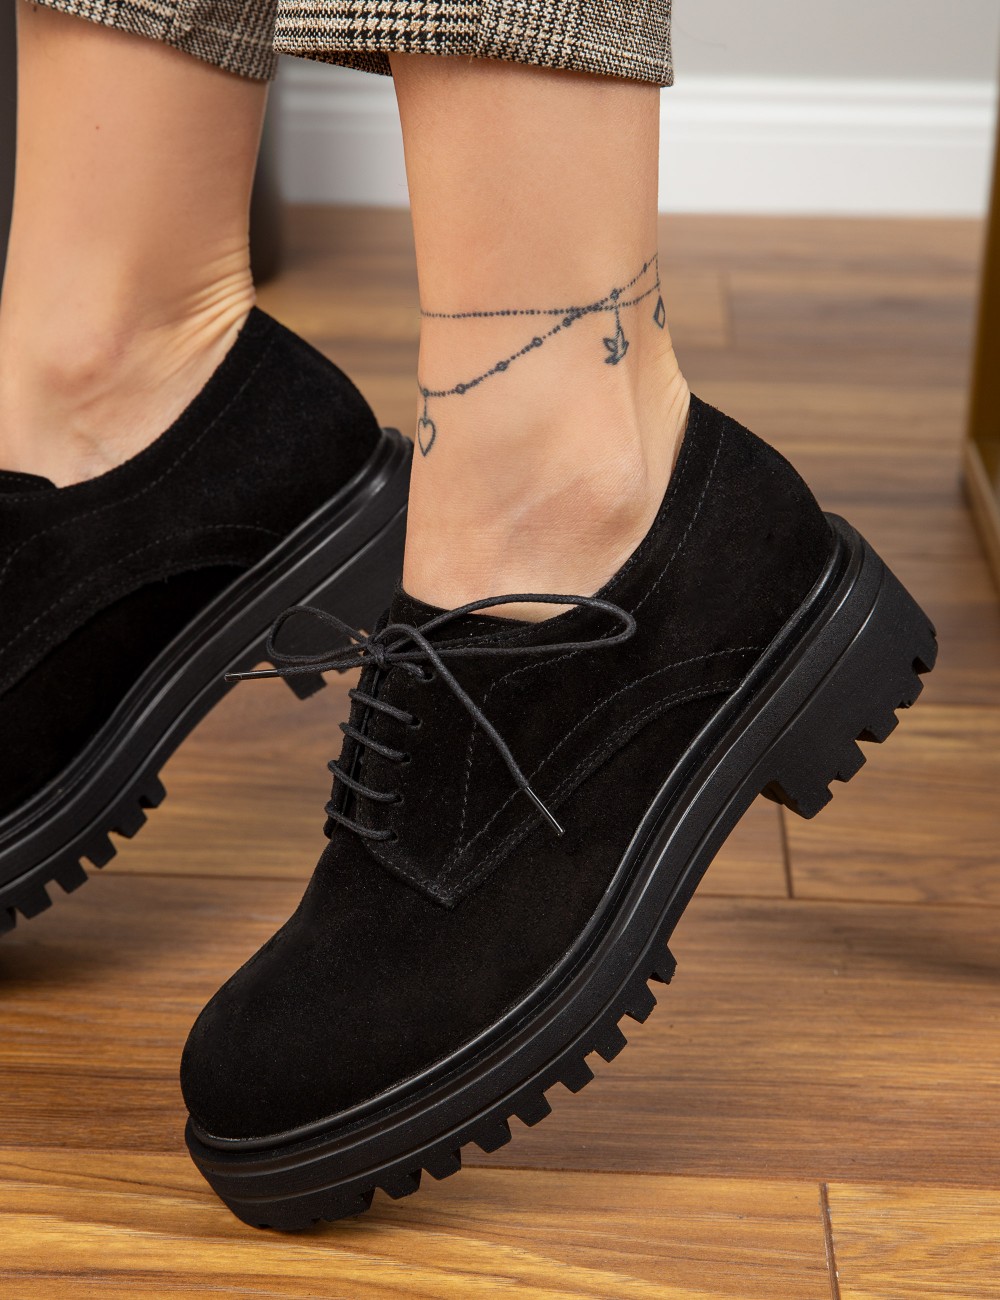 Black Suede Leather Lace-up Shoes - 01430ZSYHE05